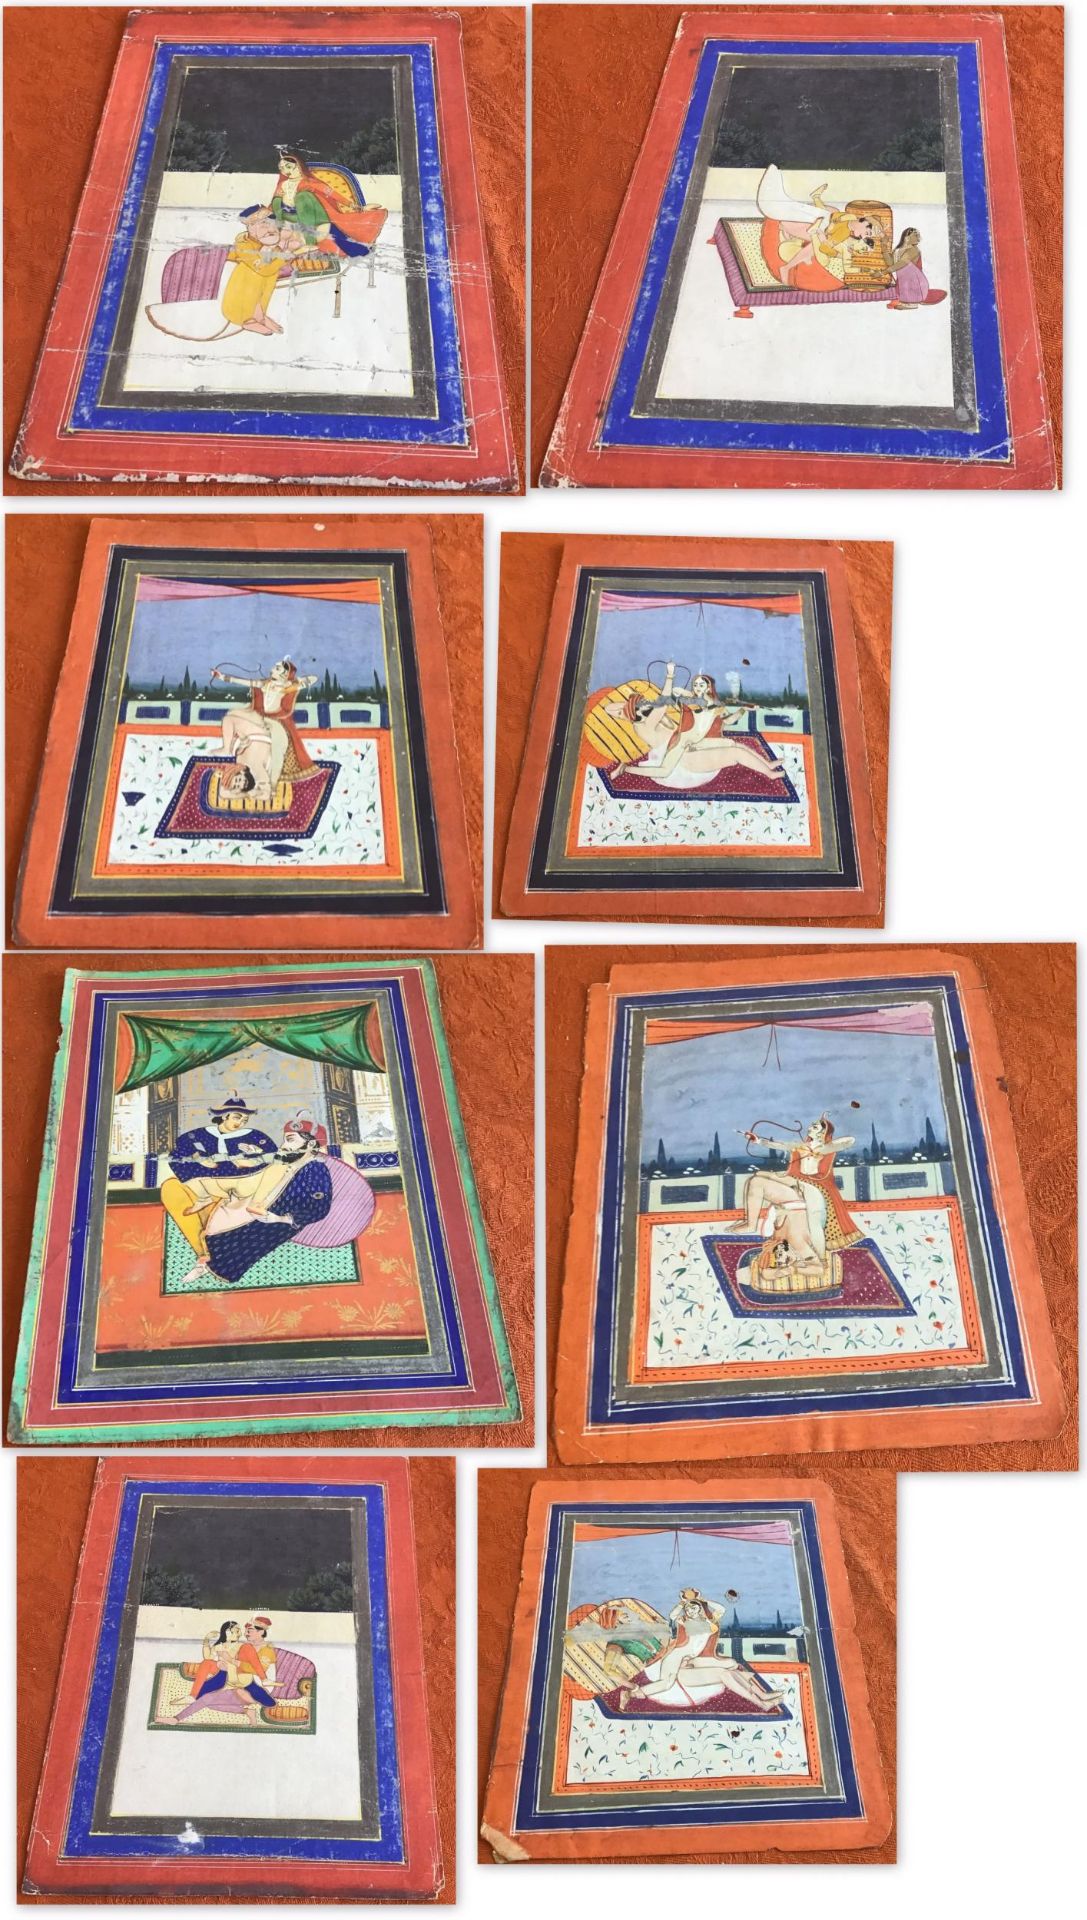 EIGHT EROTIC PAINTINGS. East India. Rajasthan, prob. Jaipur. Late 19th/beg. 20th c. Pigments and - Image 3 of 11